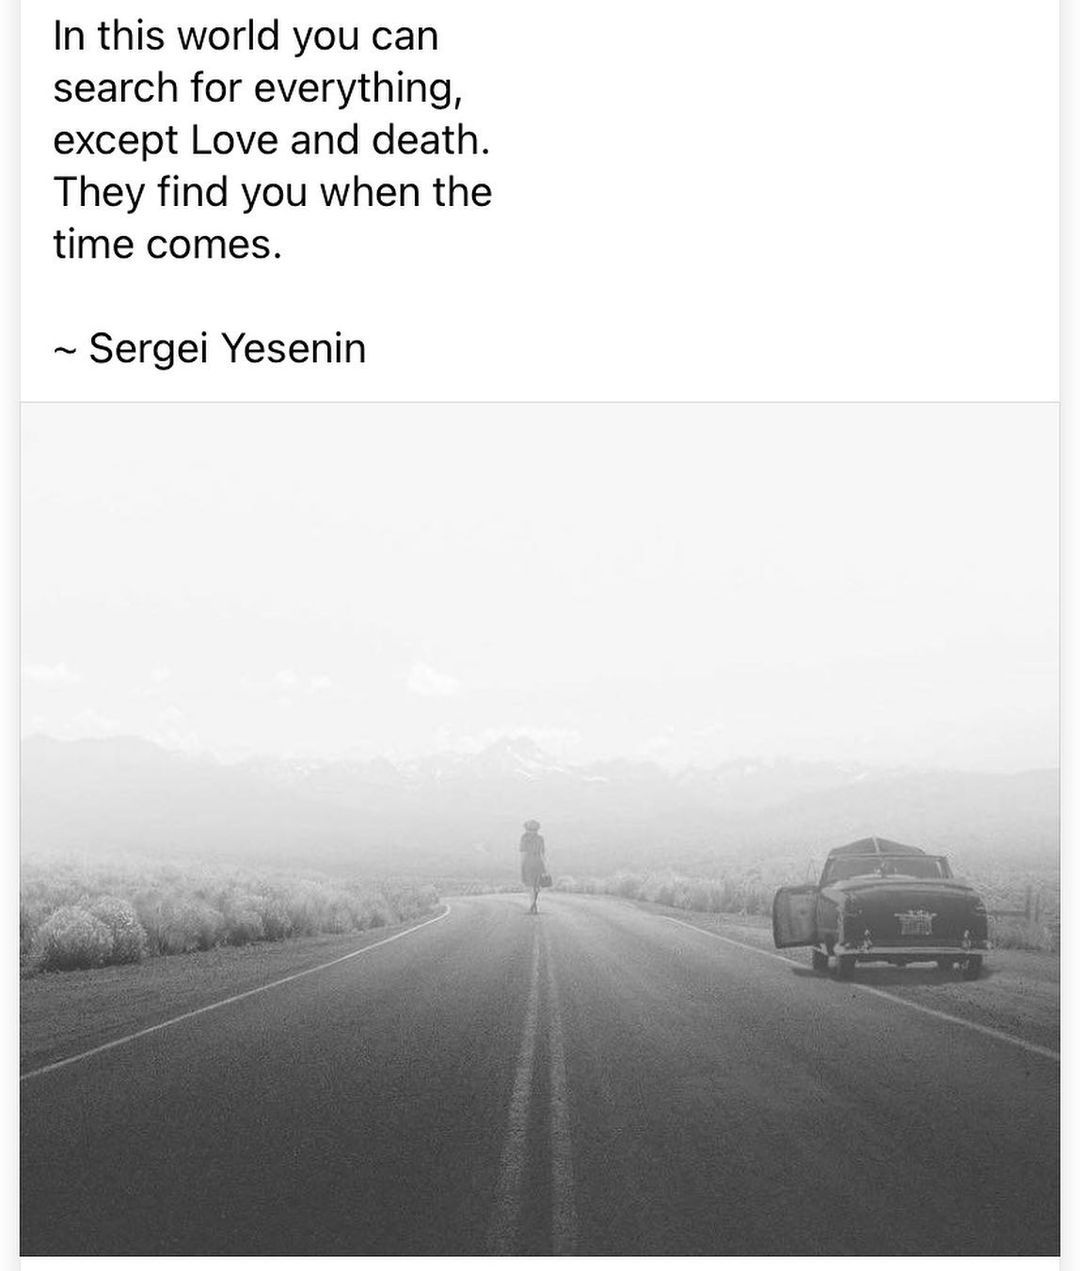 The ORIGINAL Poetic Outlaws on Instagram: “Sergei Yesenin was one of Russia’s finest poets. The man loved vodka and he had feisty manners and movie star good looks and admirers all…”